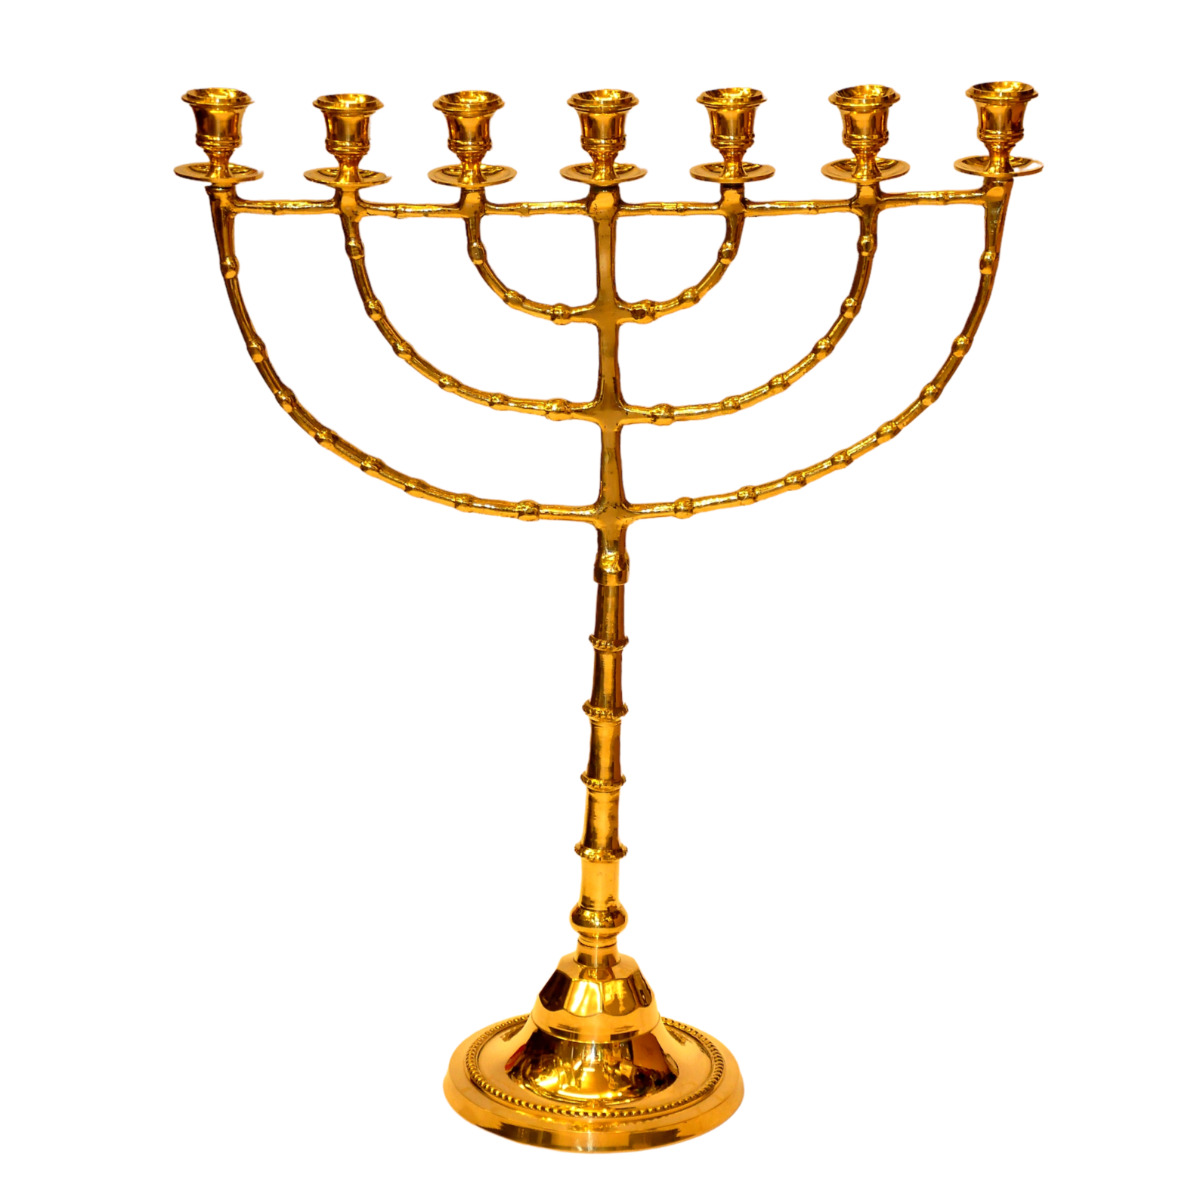 Authentic Temple Oil Menorah Gold Plated Candle Holder 29.5″ / 75cm